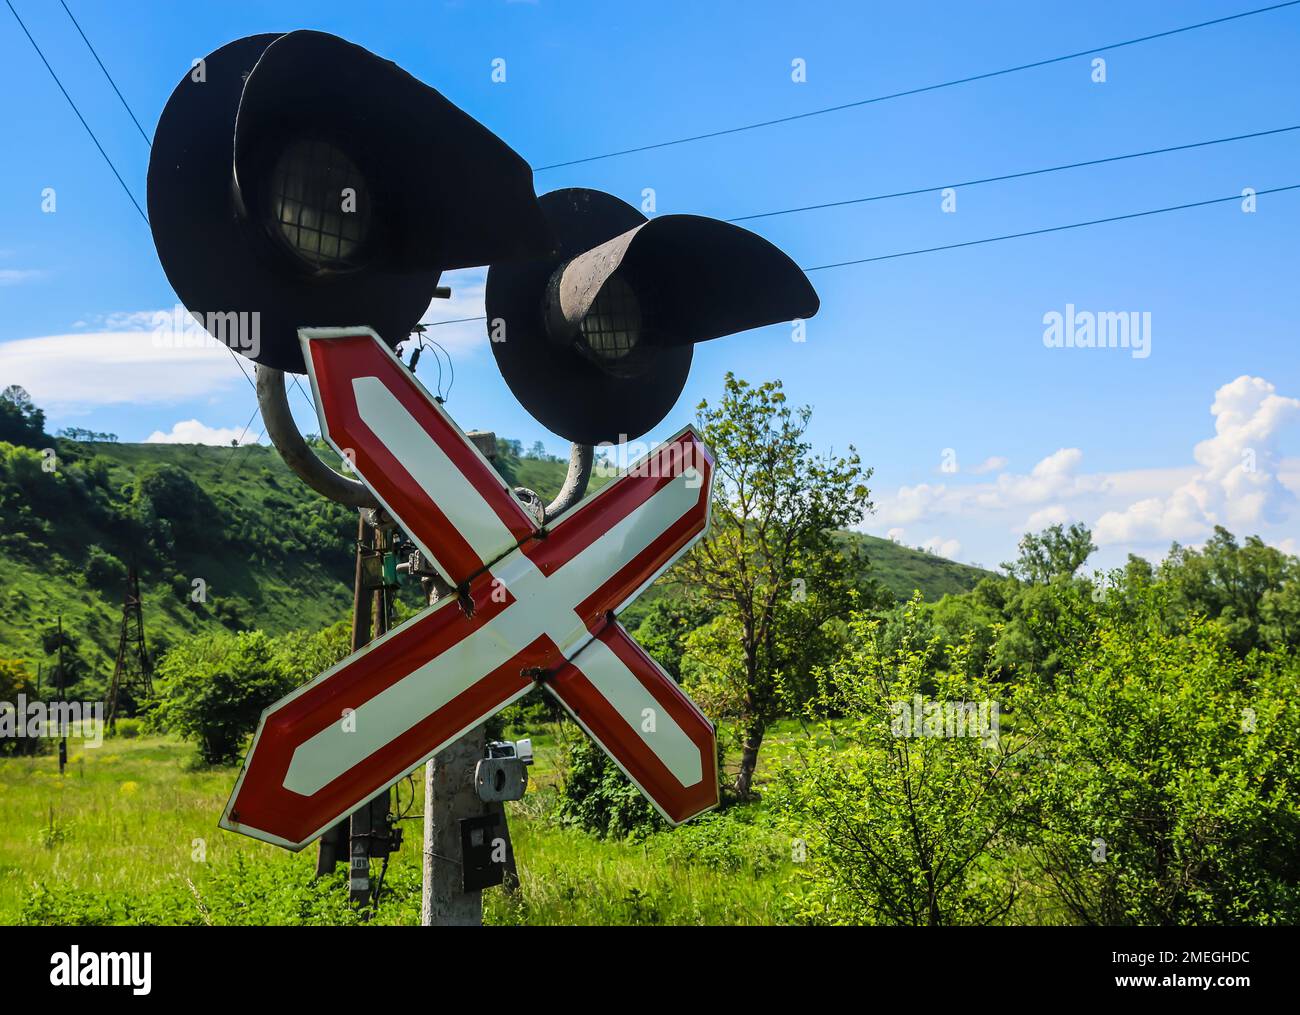 stop sign in front of a railway crossing on a background of blue sky with clouds Stock Photo